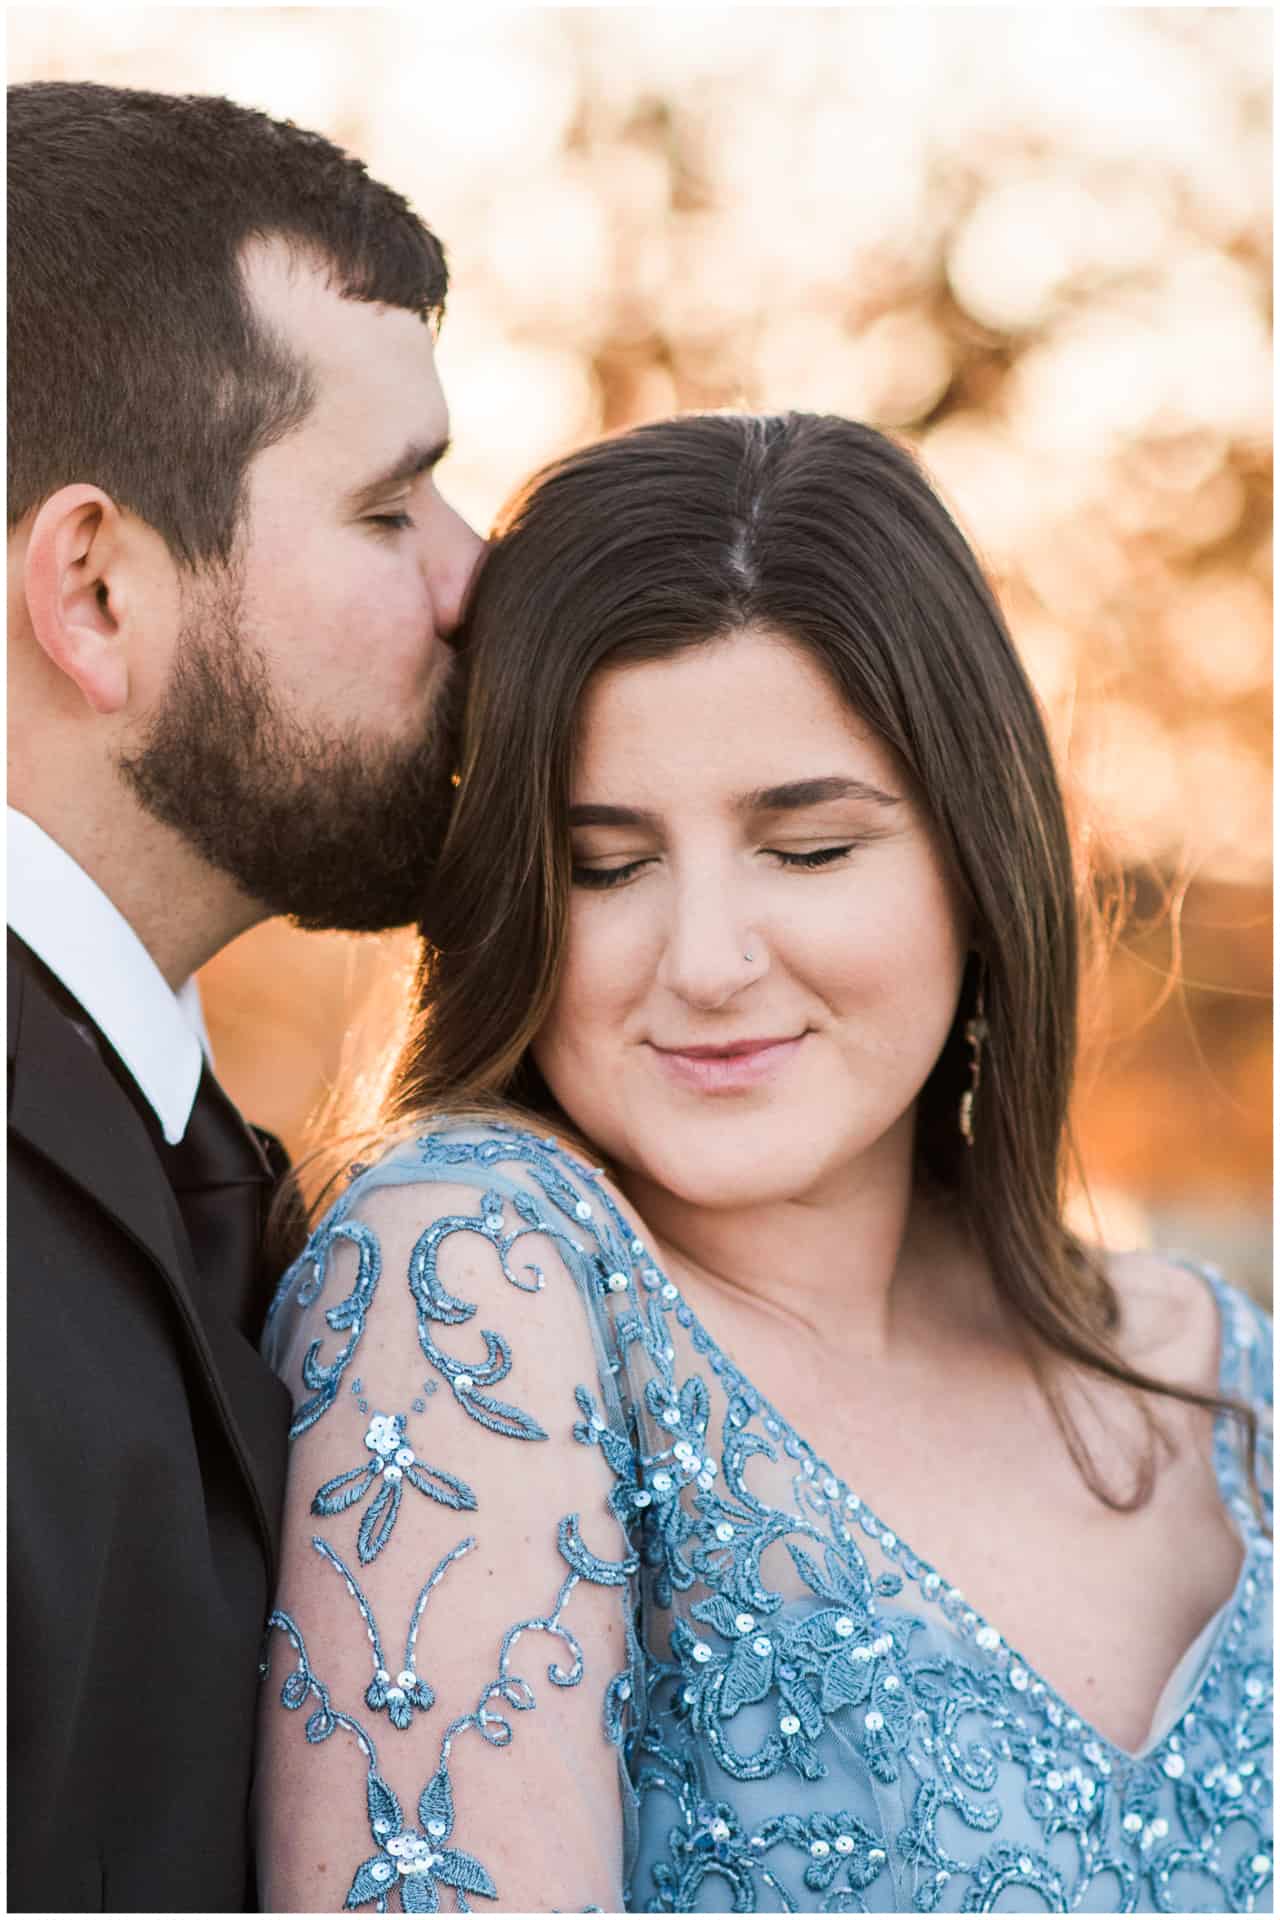 Intimate Engagement Session - Formal Outfits - Fall engagement session